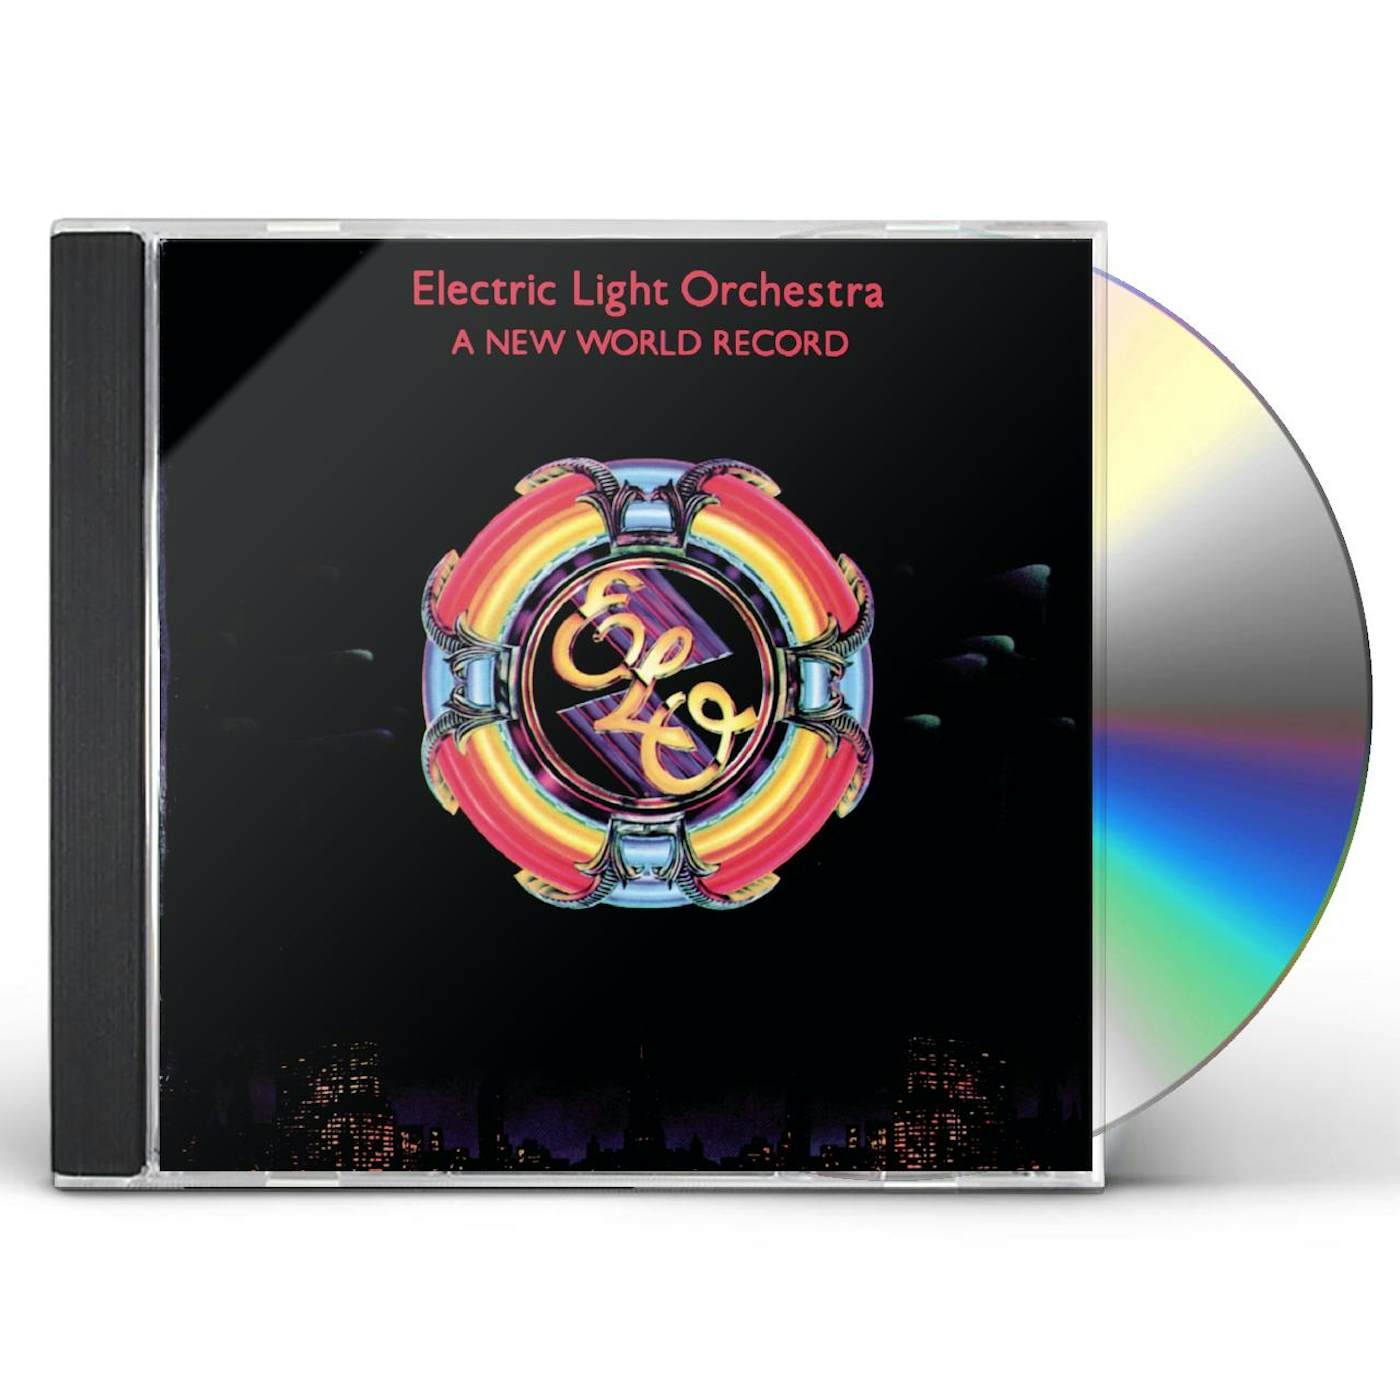 ELO (Electric Light Orchestra) NEW WORLD RECORD CD